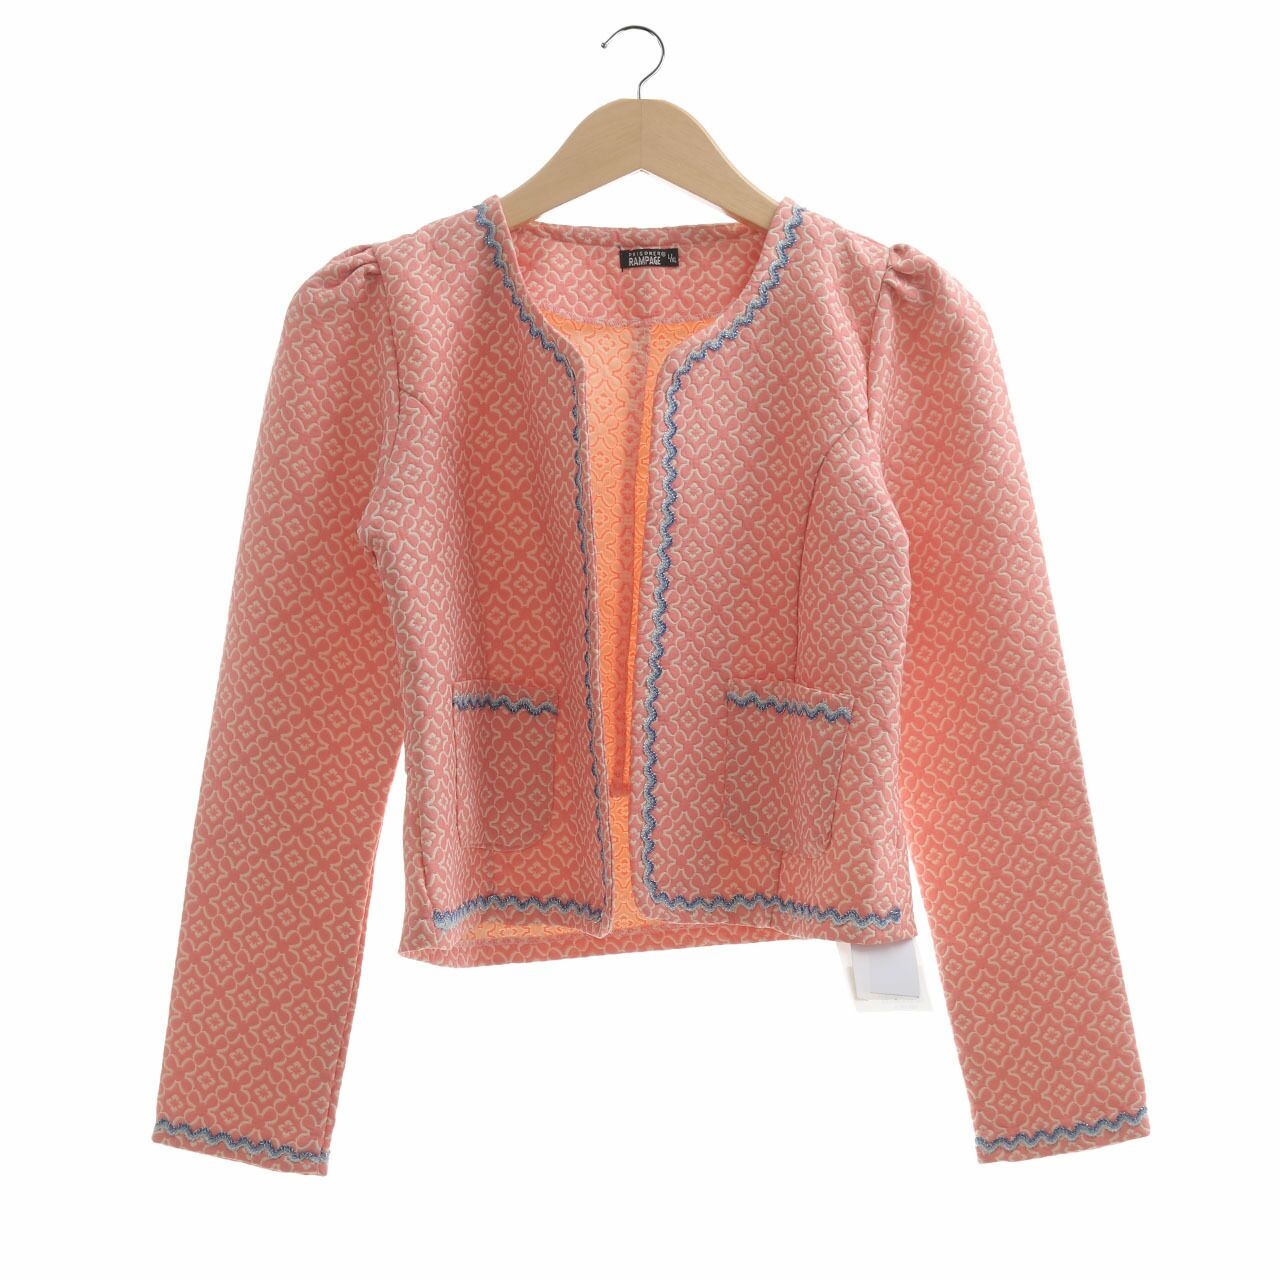 Rampage Pink Patterned Outerwear